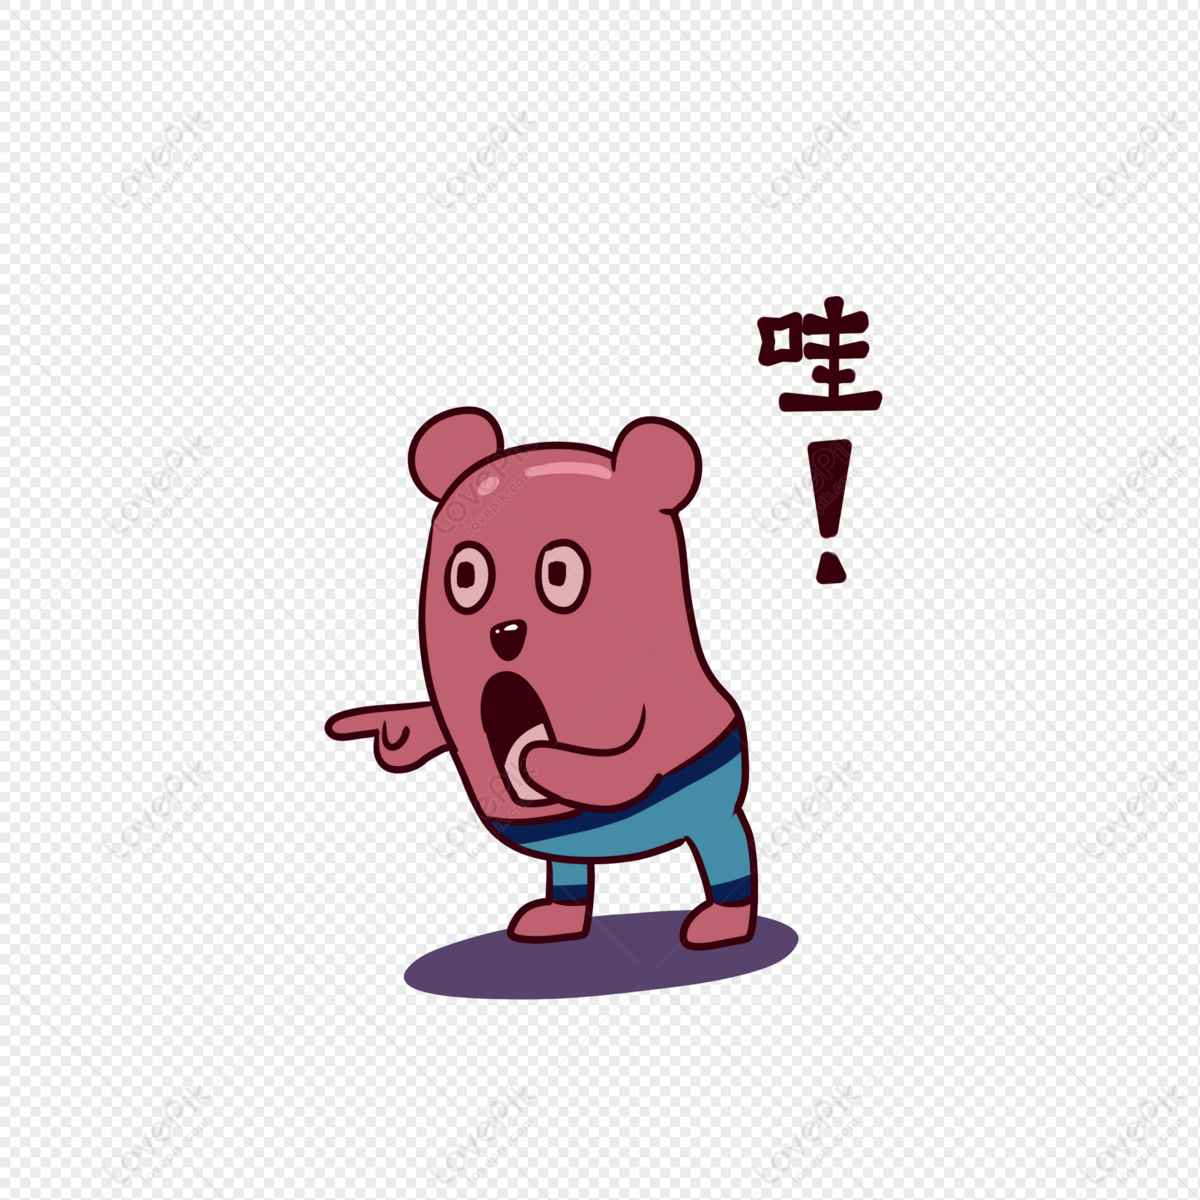 Sweet Potato Bear Cartoon Wow Expression Pack PNG Transparent And Clipart  Image For Free Download - Lovepik | 401144306